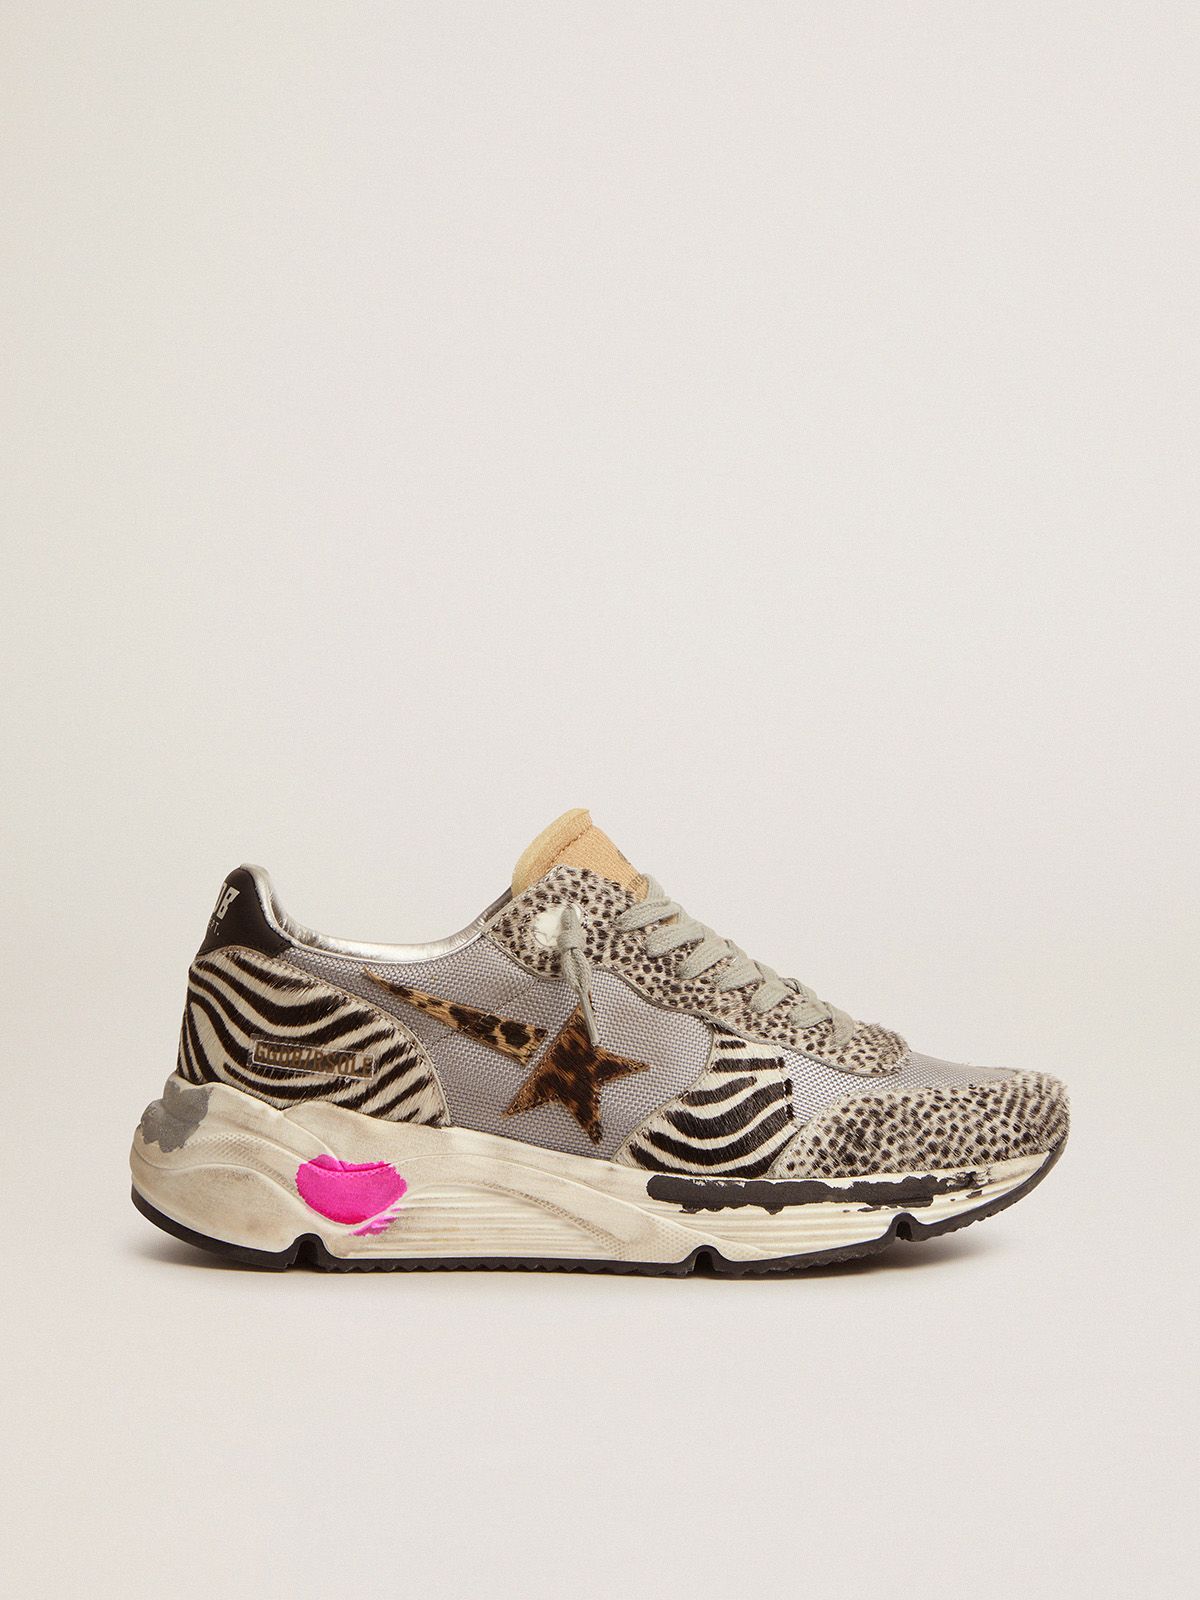 golden goose skin in pony sneakers Sole and animal-print Running mesh